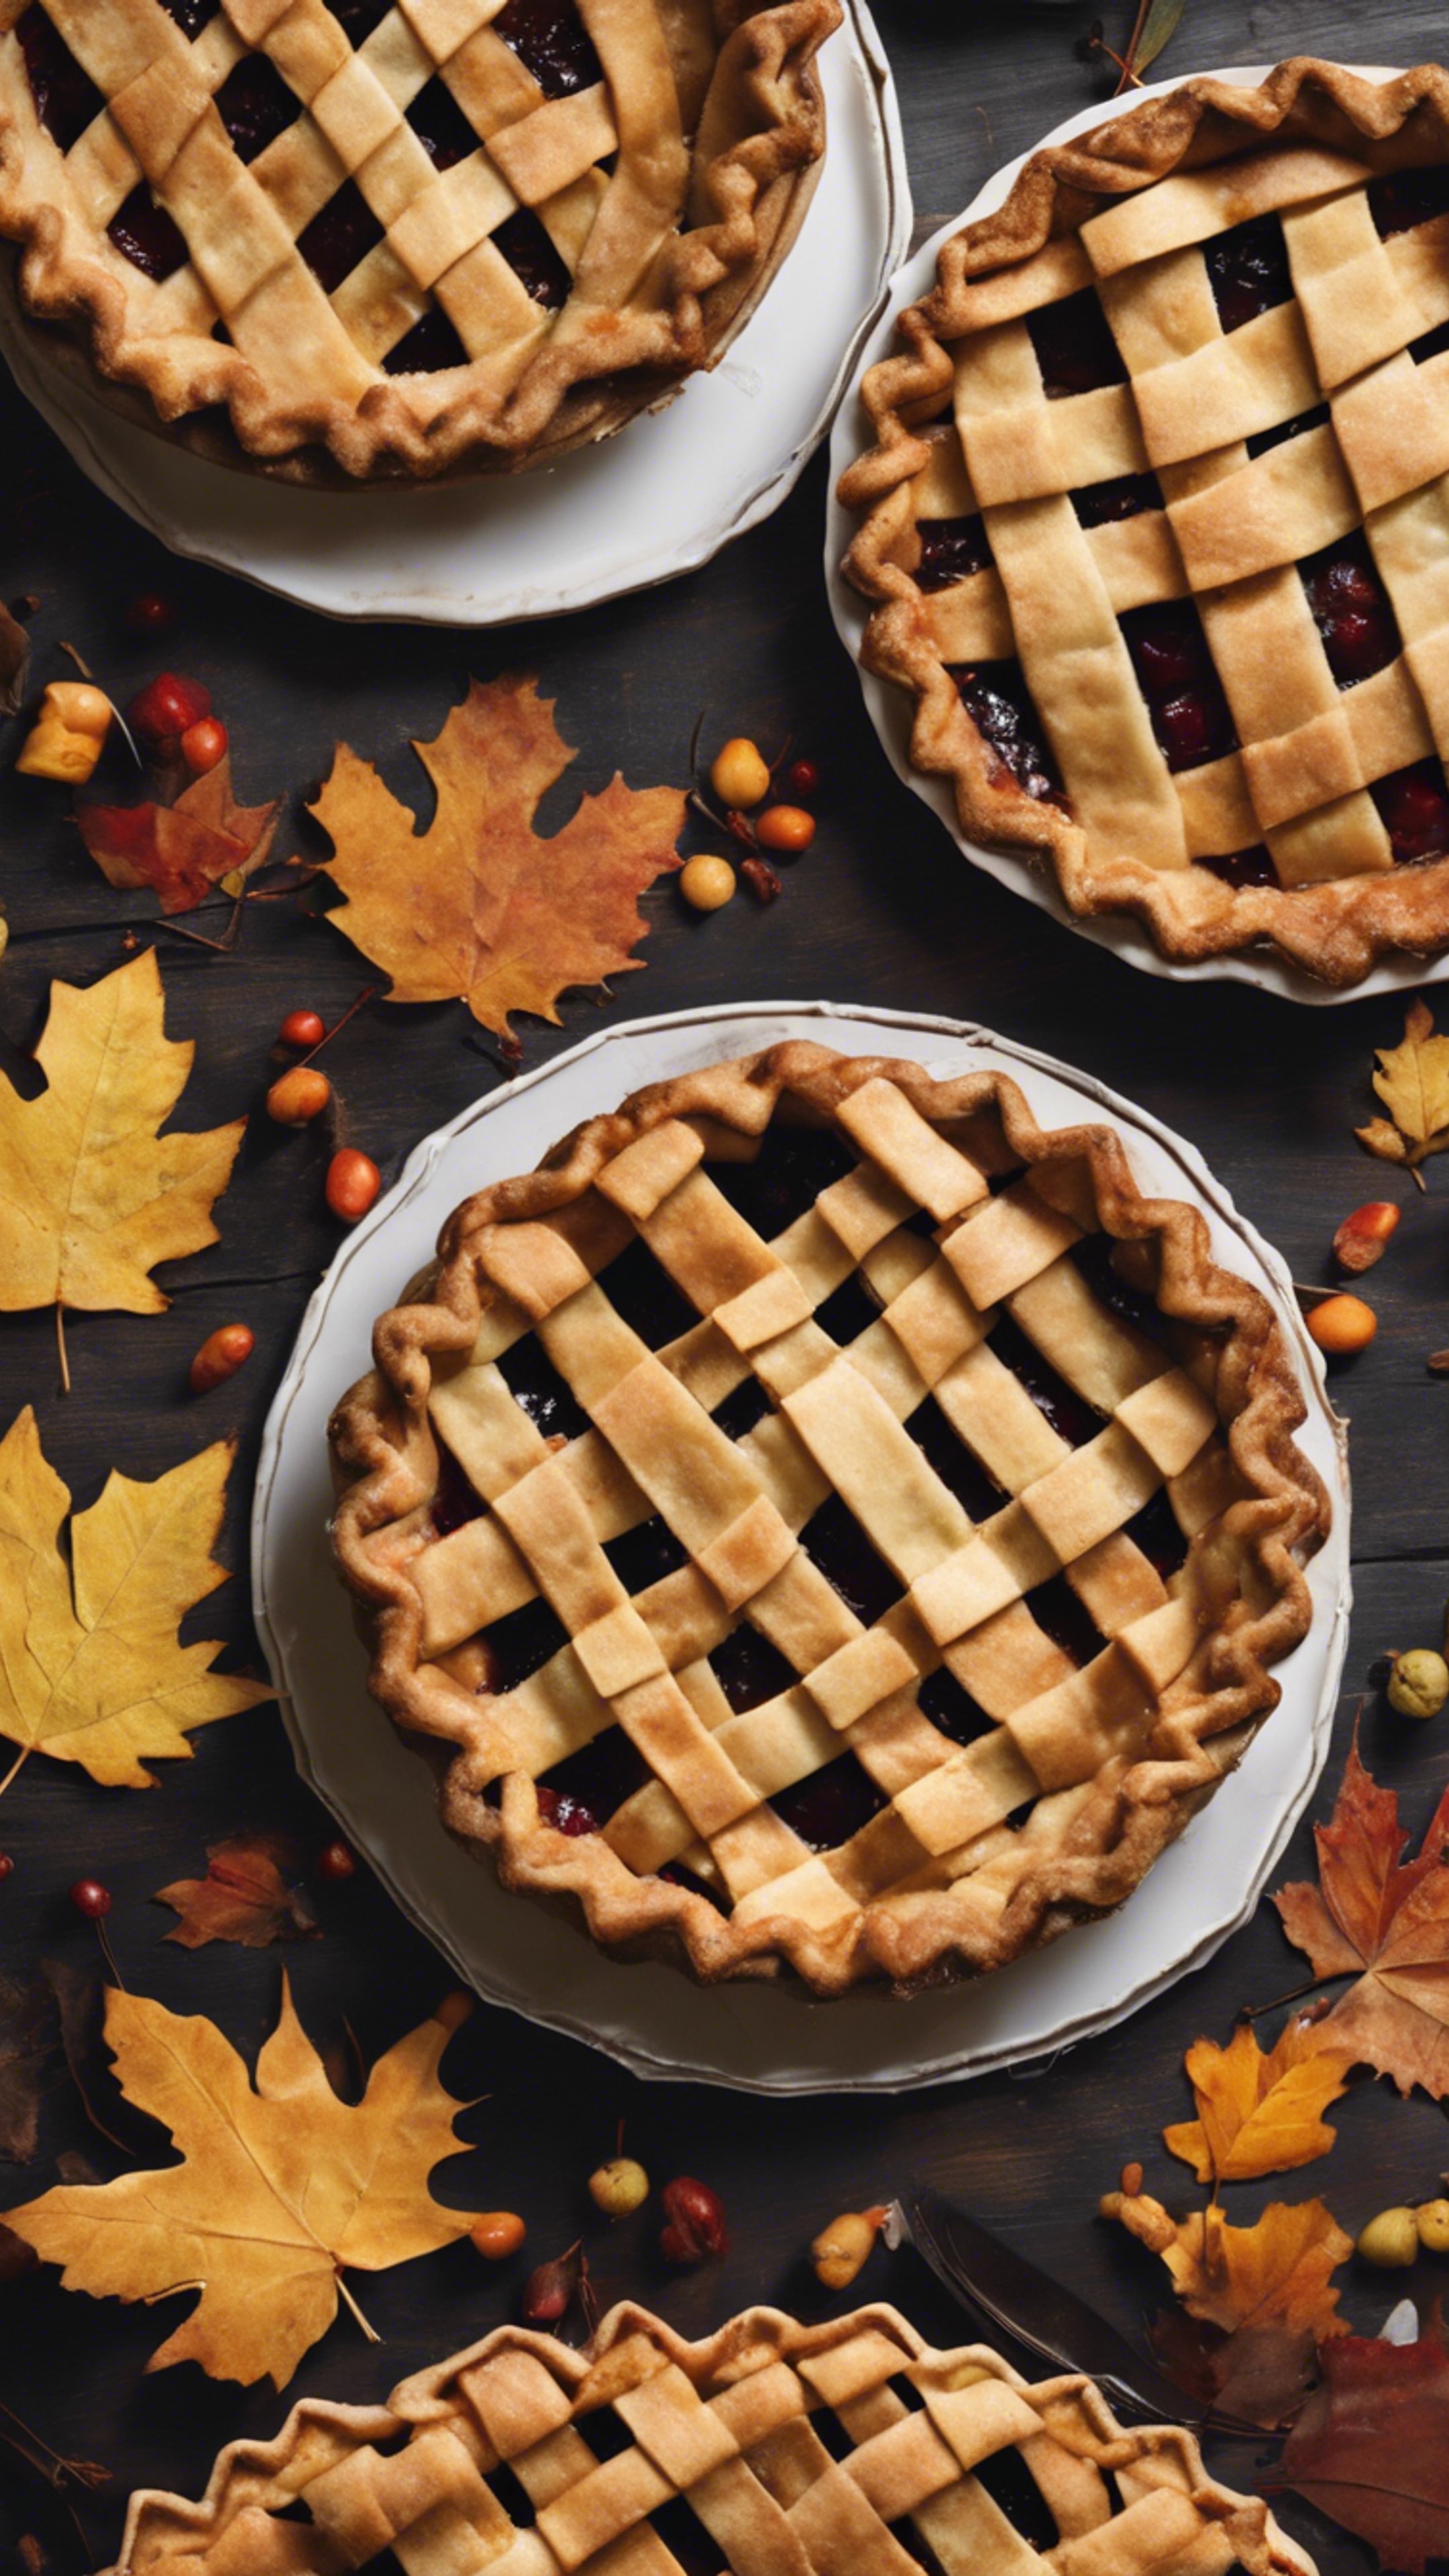 A stylized image of homemade pies decorated with intricate lattice work and autumn leaf pie crusts for an aesthetic Thanksgiving. Wallpaper[93a52954e57a4efda909]